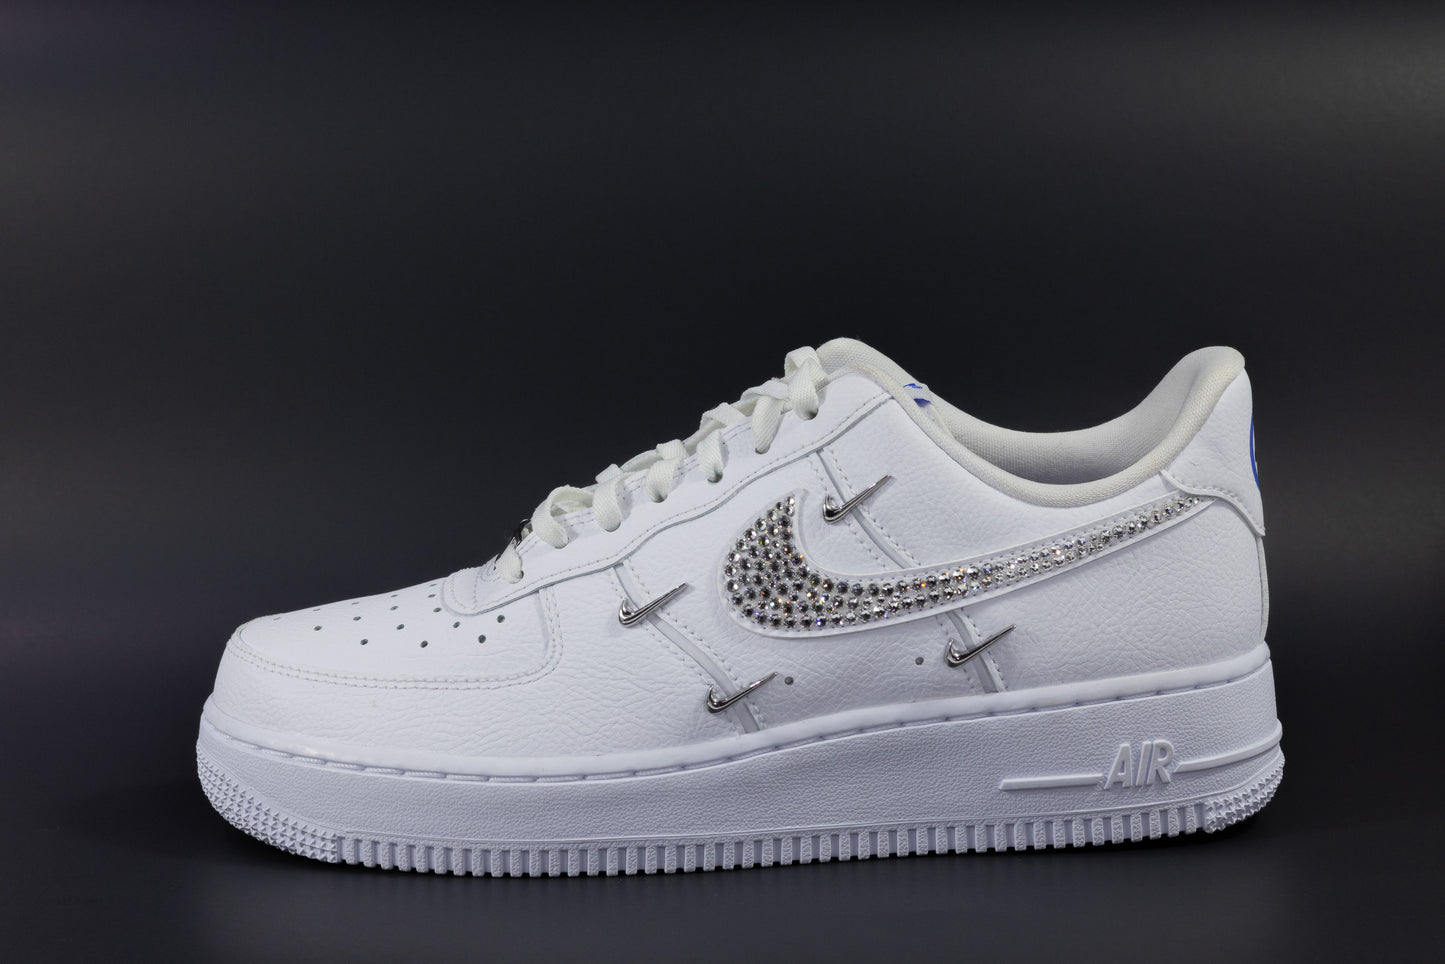 Nike Air Force 1 '07 LX with Swarovski Crystals